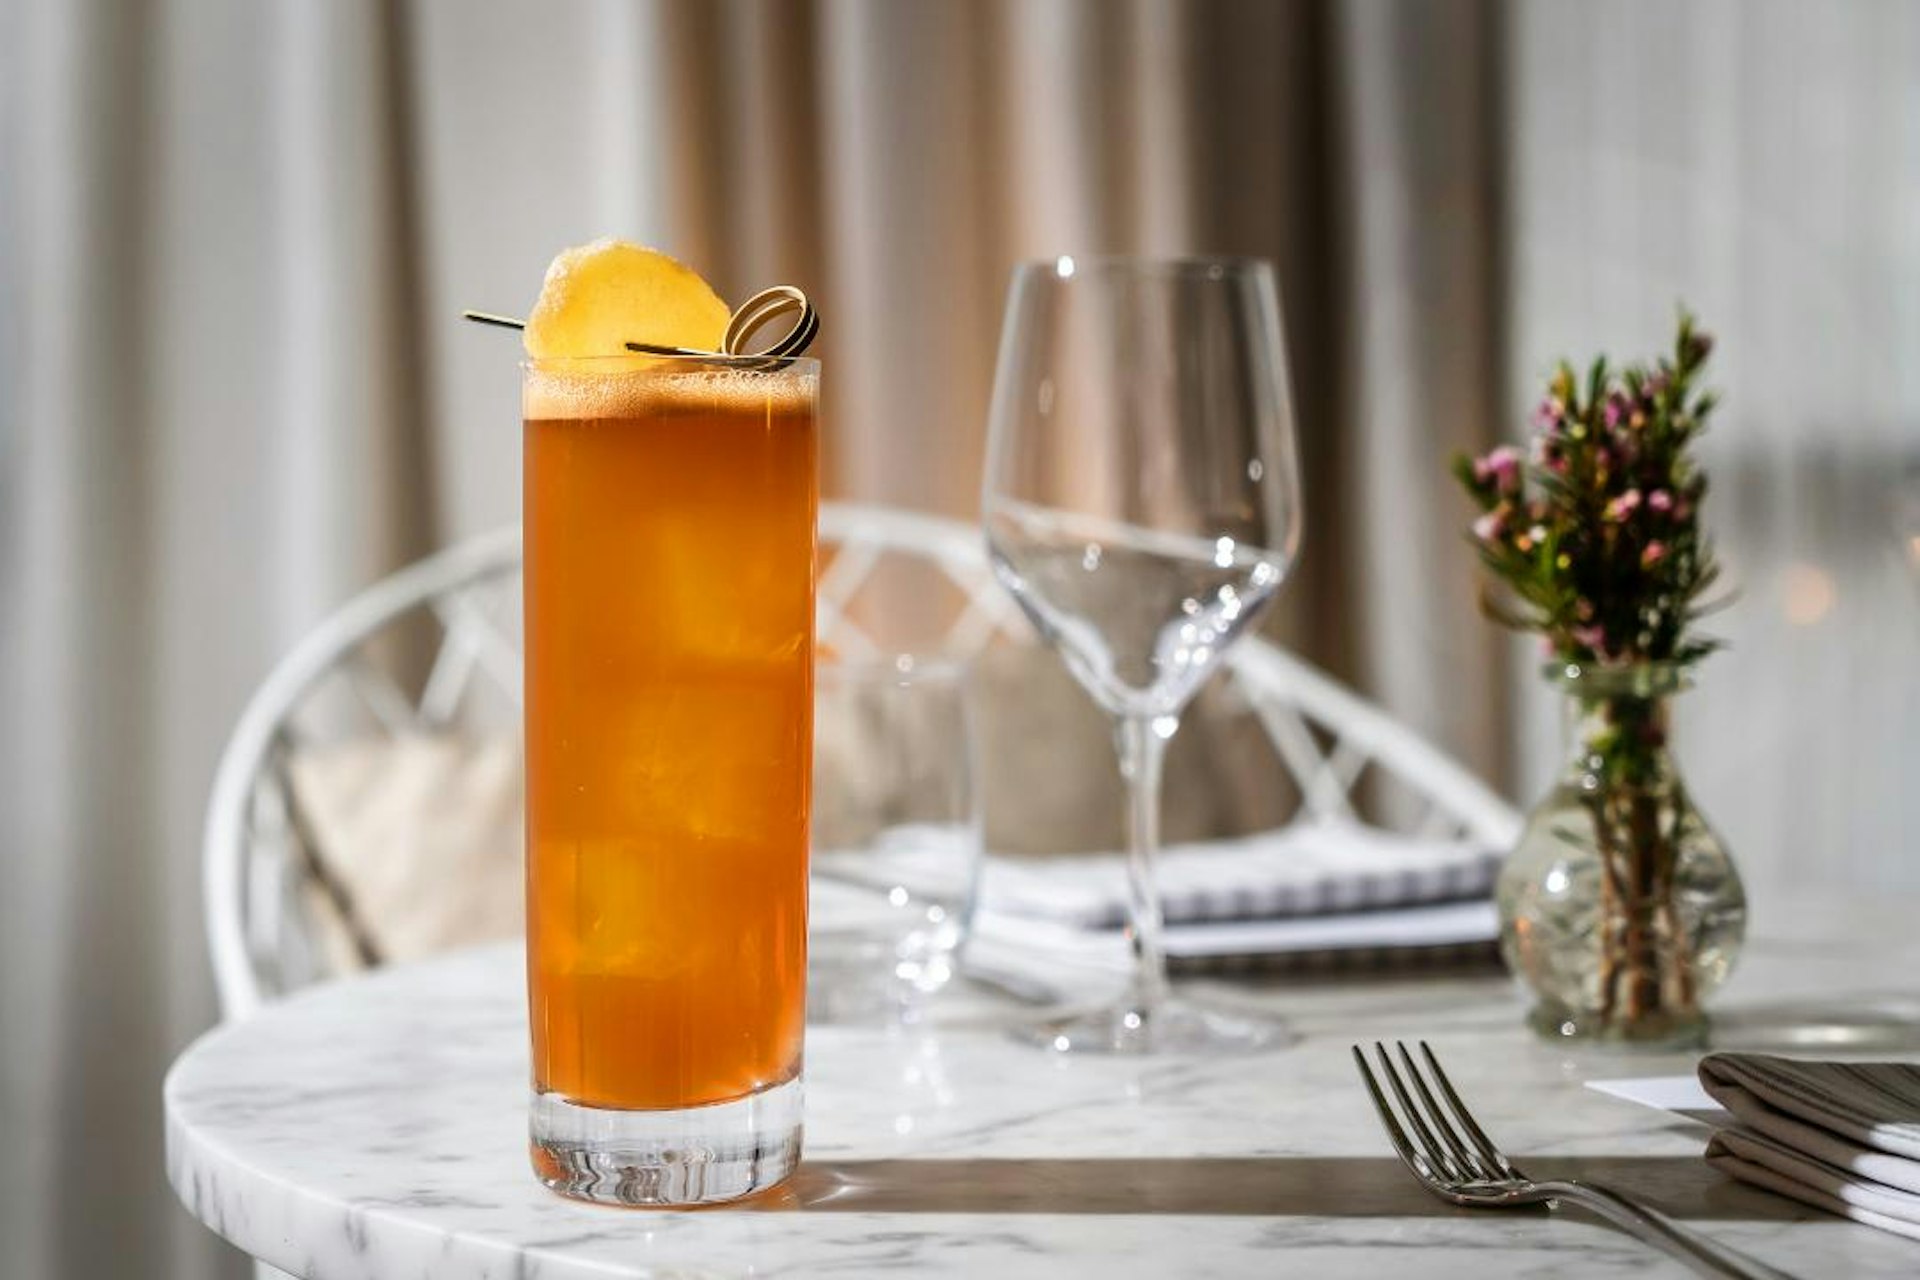 A tall class is filled with an orange-colored mocktail and sits on a round marble table.